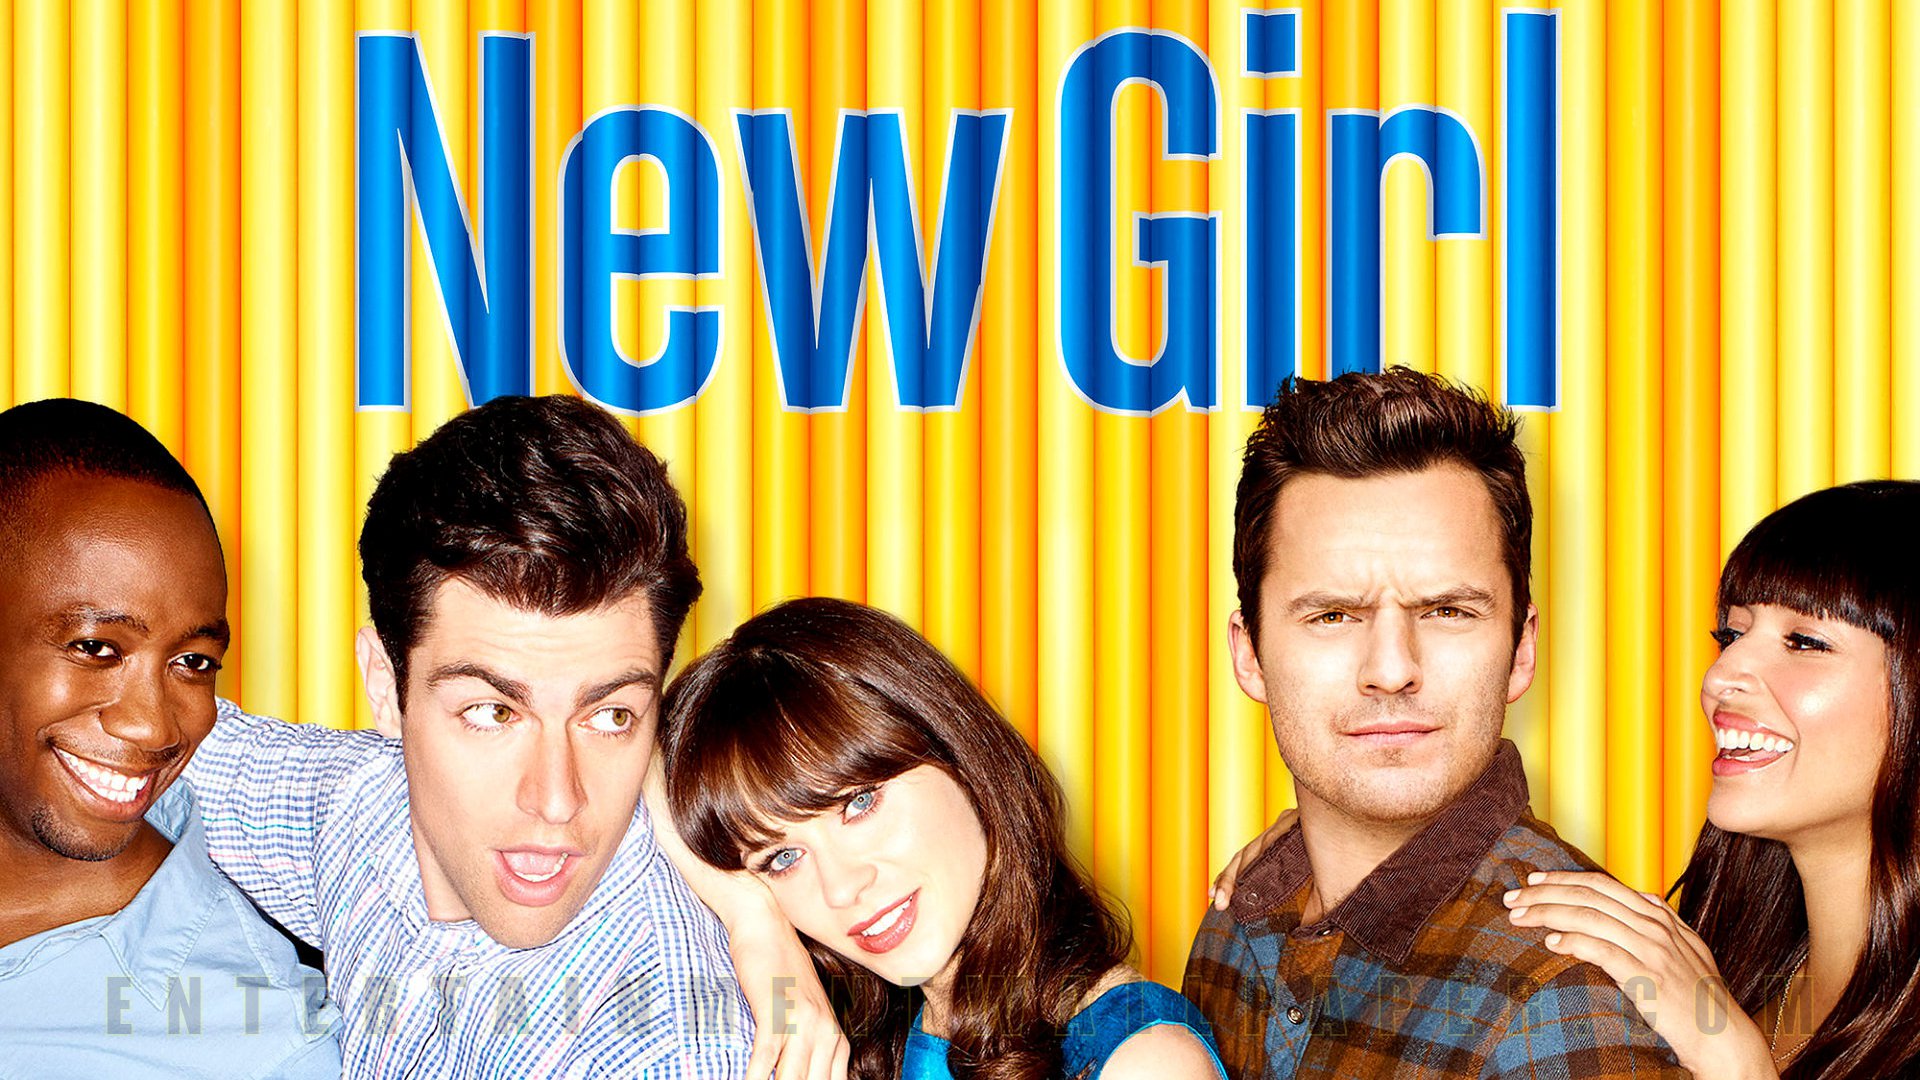 New Girl Backgrounds, Compatible - PC, Mobile, Gadgets| 1920x1080 px